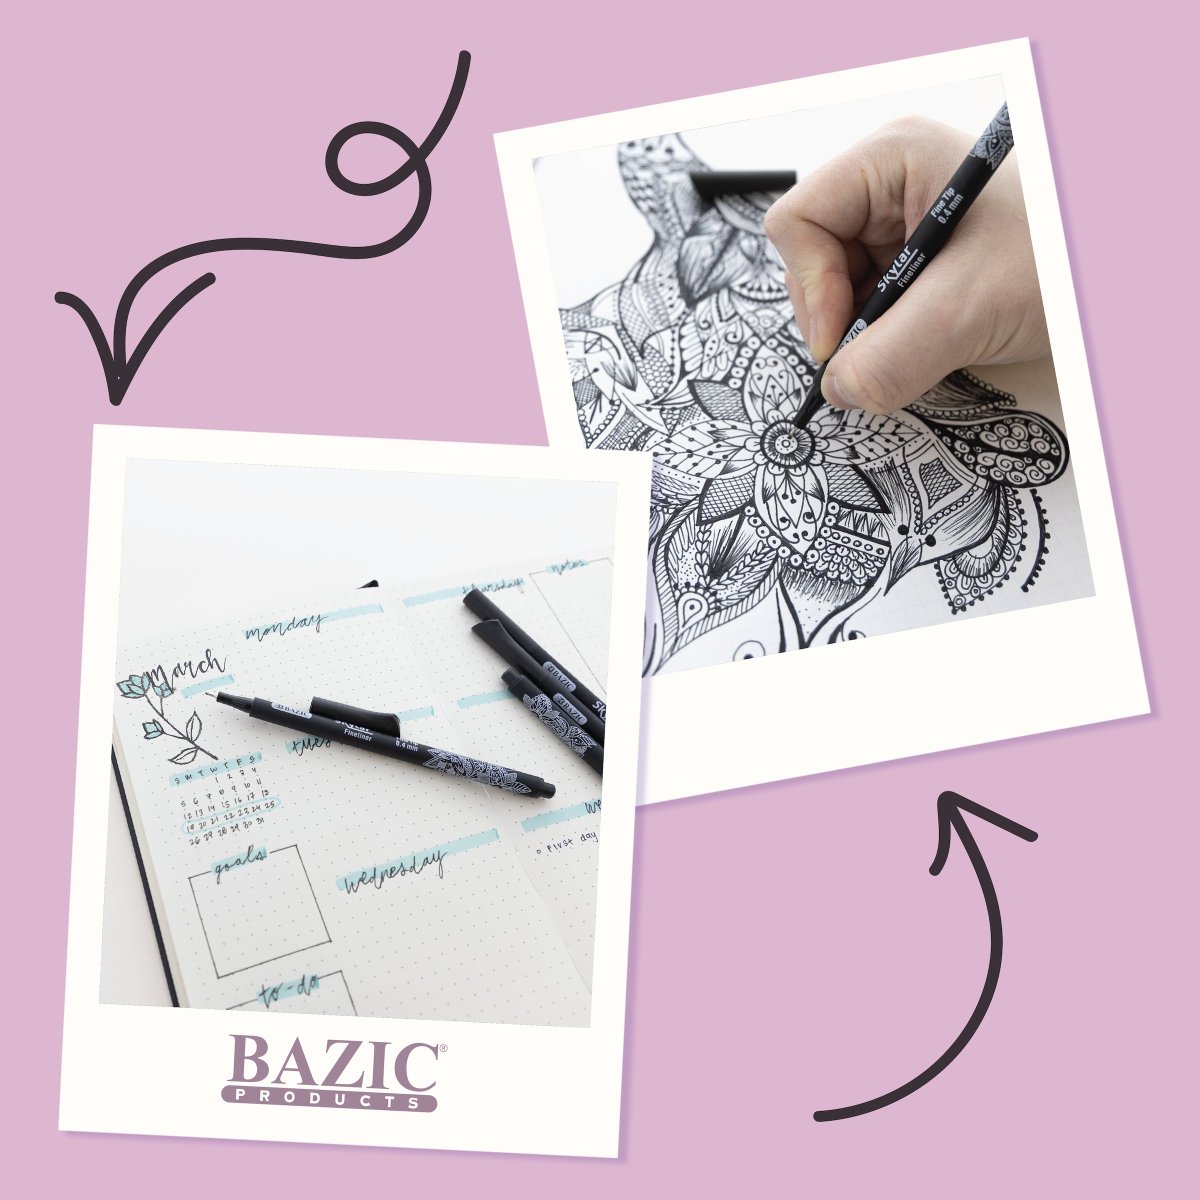 Doodle, sketch, and draw with confidence using our Bazic Fine Liner pens 🖊️ Your imagination is the limit! 🌟 Shop our collection and unleash your creativity at bazicstore.com